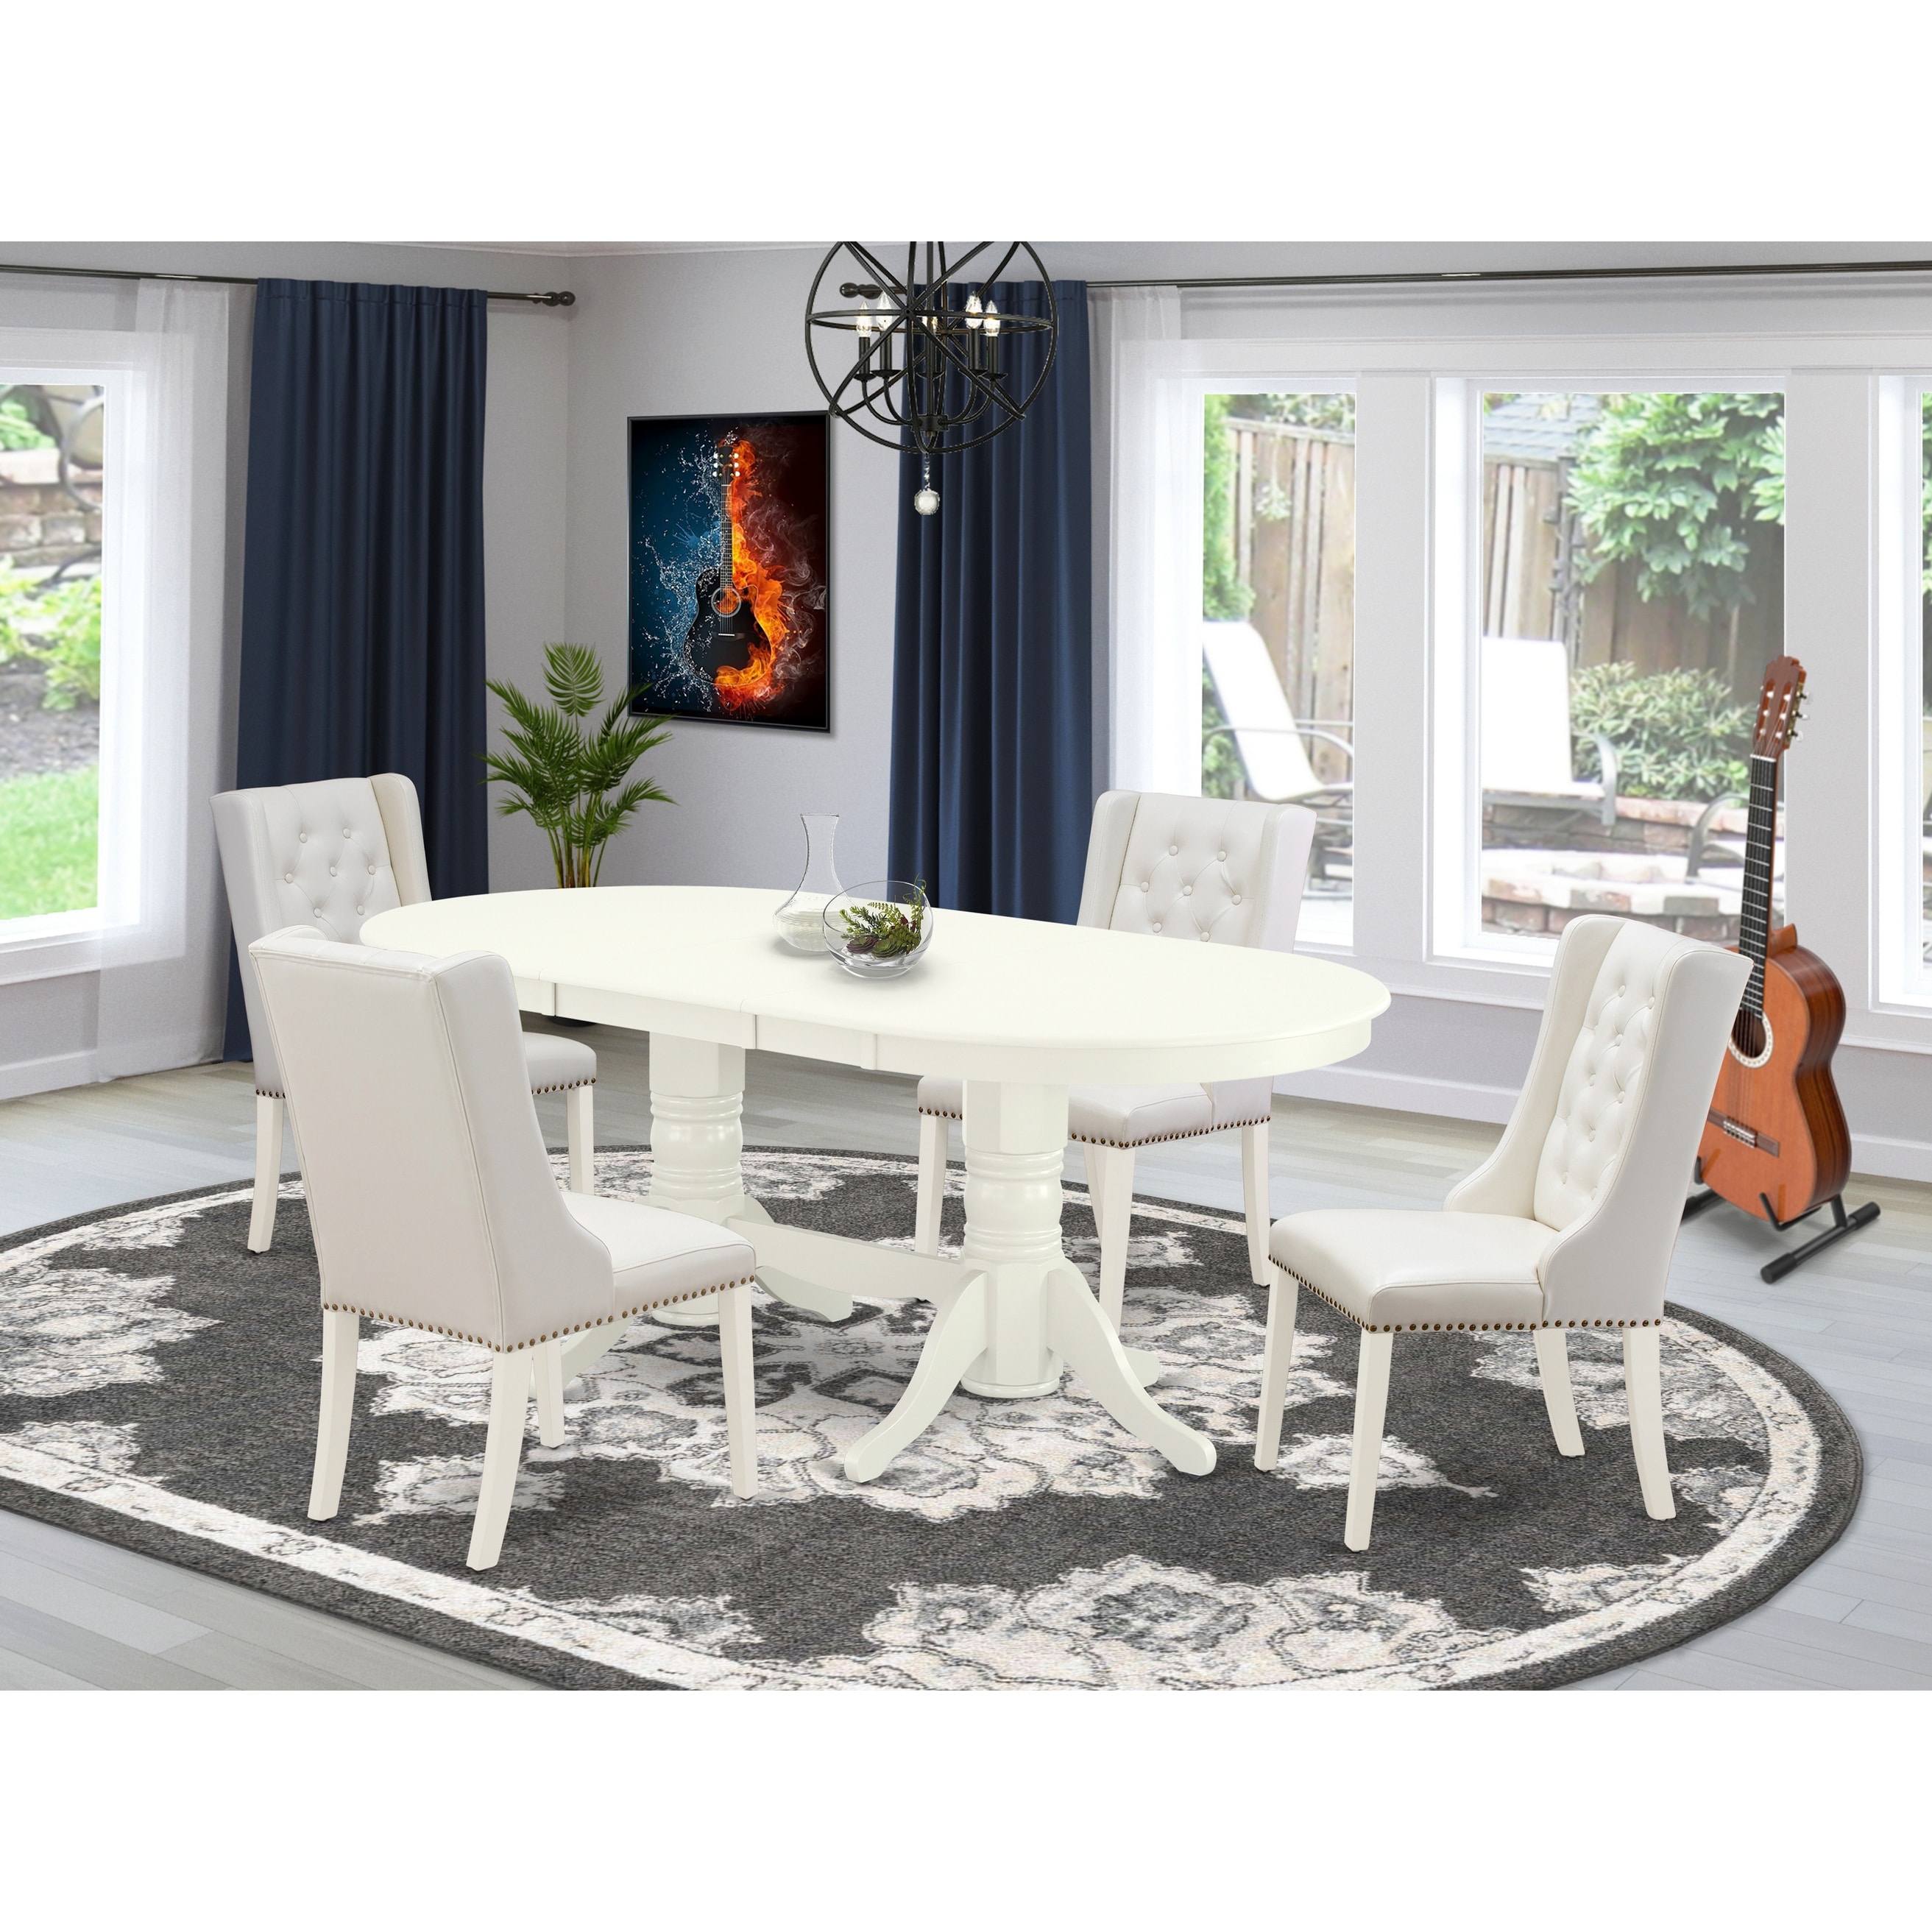 Abbey Park 7 Piece Dining Room (Table with 4 Upholstered Side